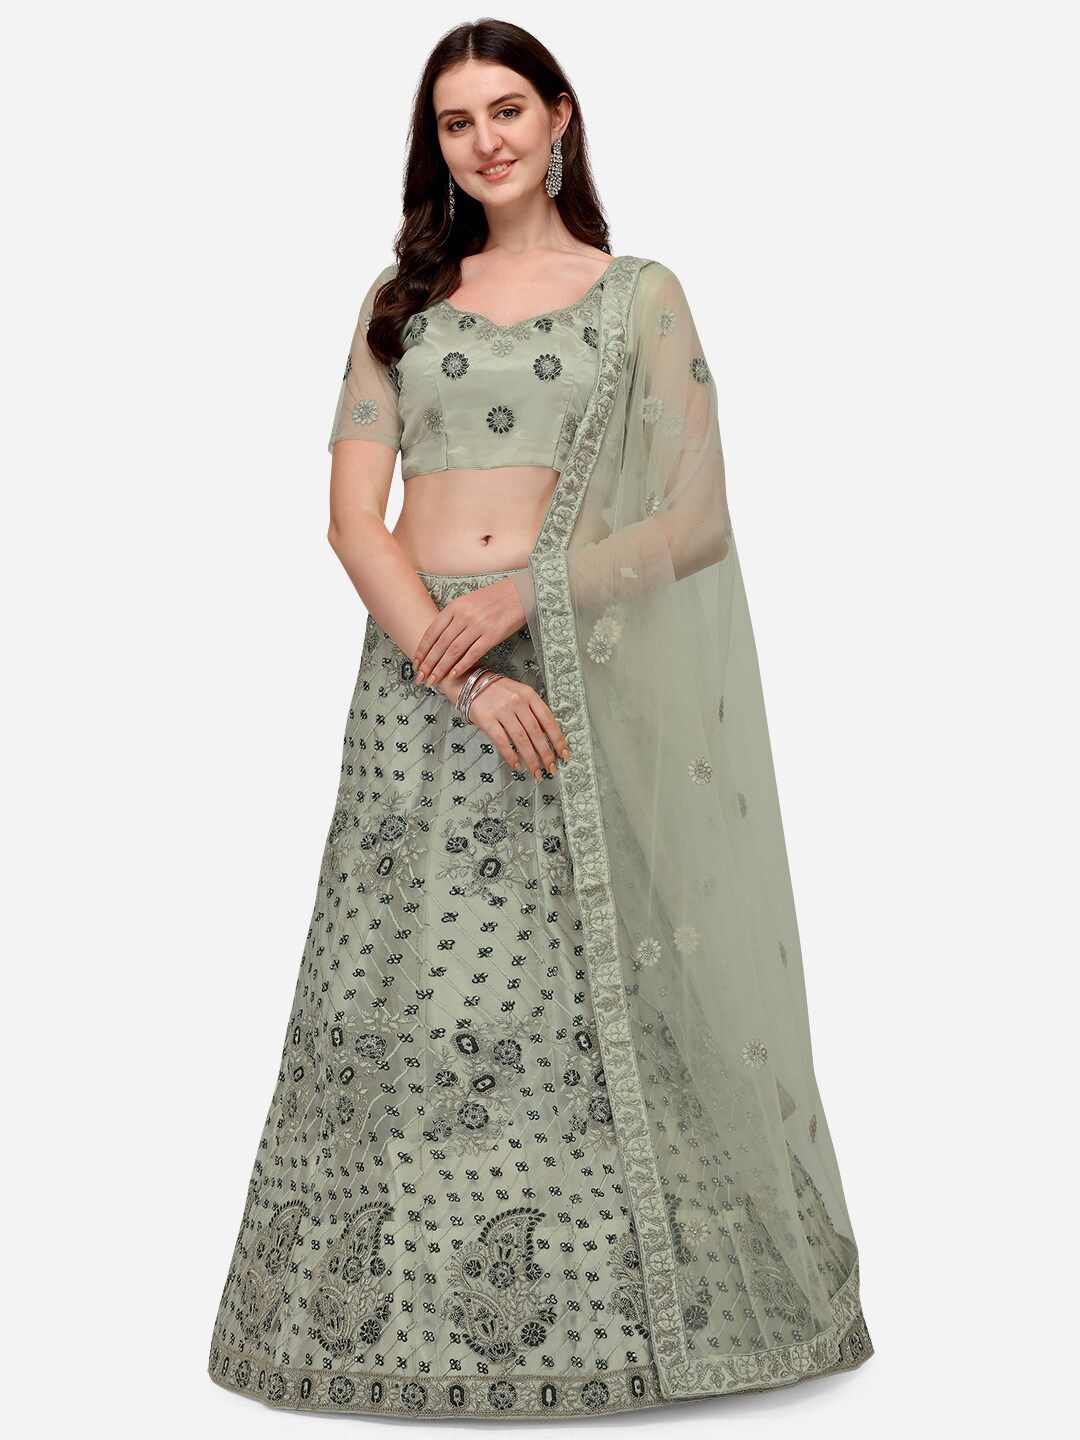 VRSALES Lime Green Embroidered Semi-Stitched Lehenga & Unstitched Blouse With Dupatta Price in India